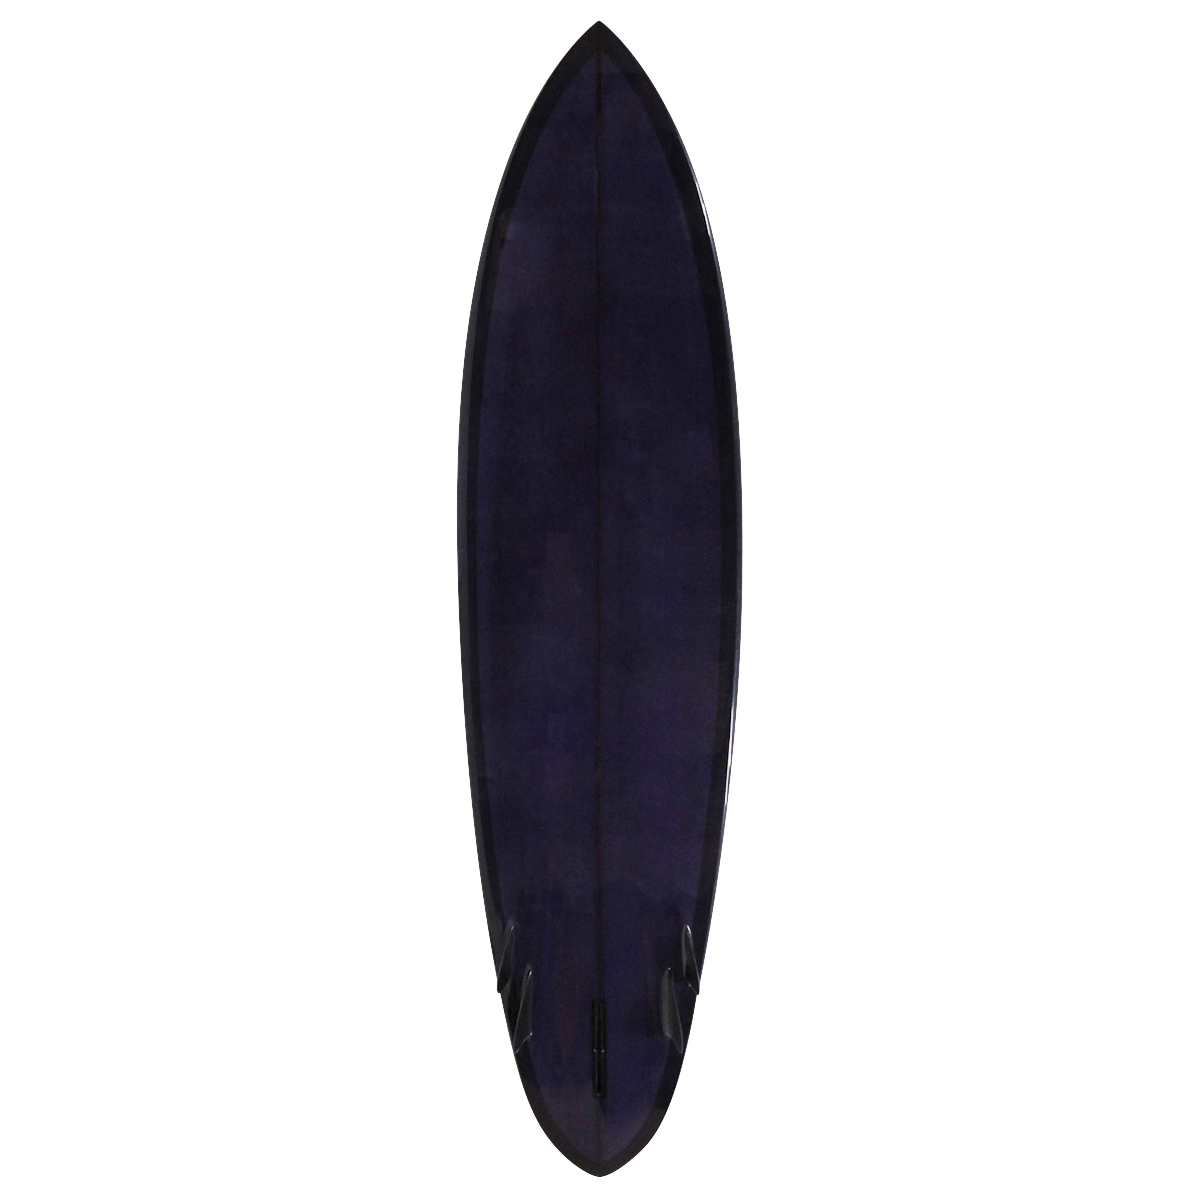 RICH PAVEL / 5FIN BONZER  Shaped by RICH PAVEL